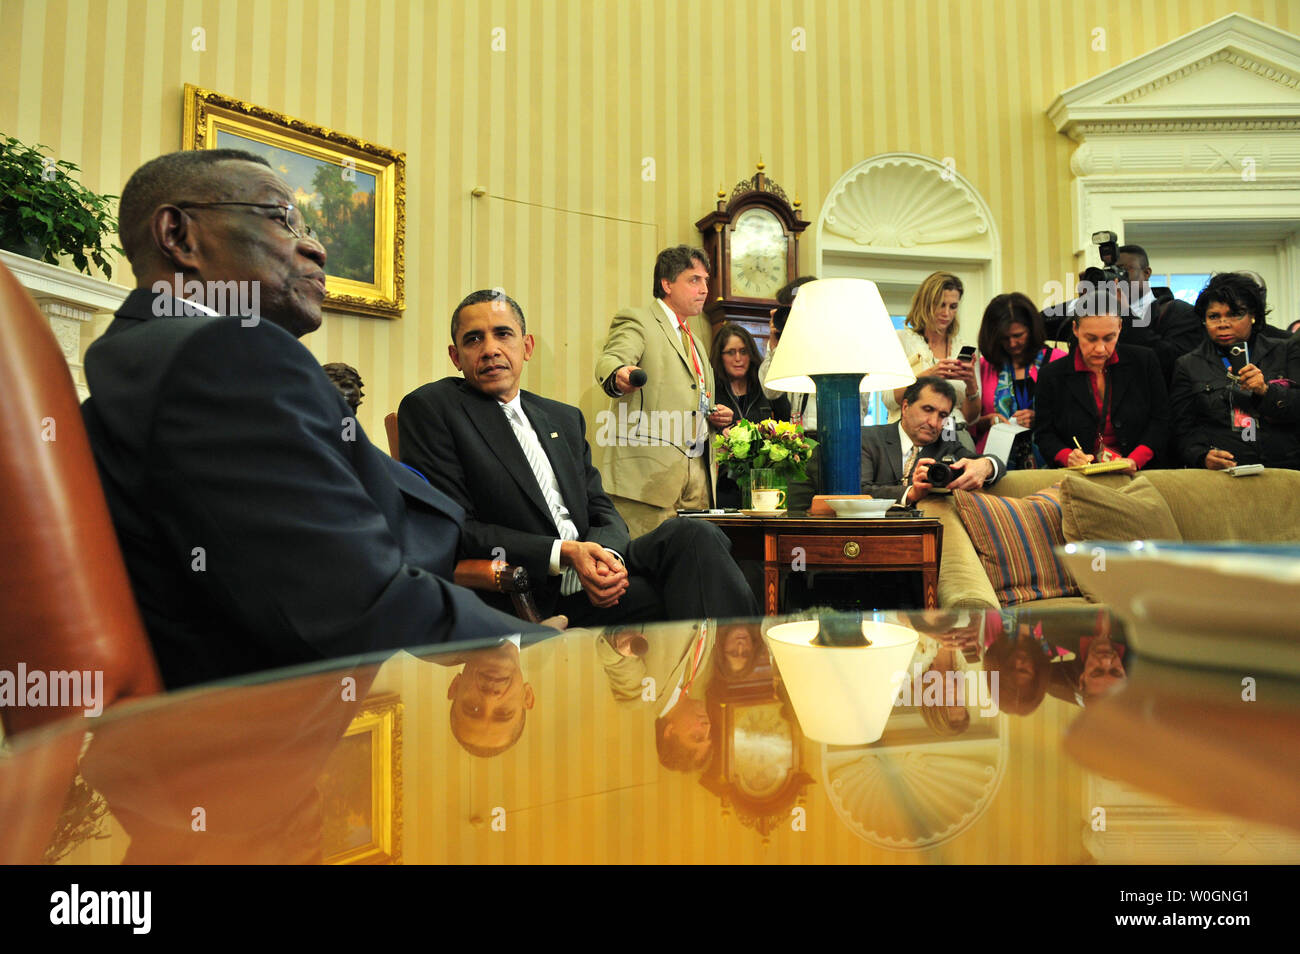 President Barack Obama meets with President John Evans Atta Mills of Ghana in the Oval Office of the White House in Washington, D.C. on March 8, 2012.  UPI/Kevin Dietsch Stock Photo